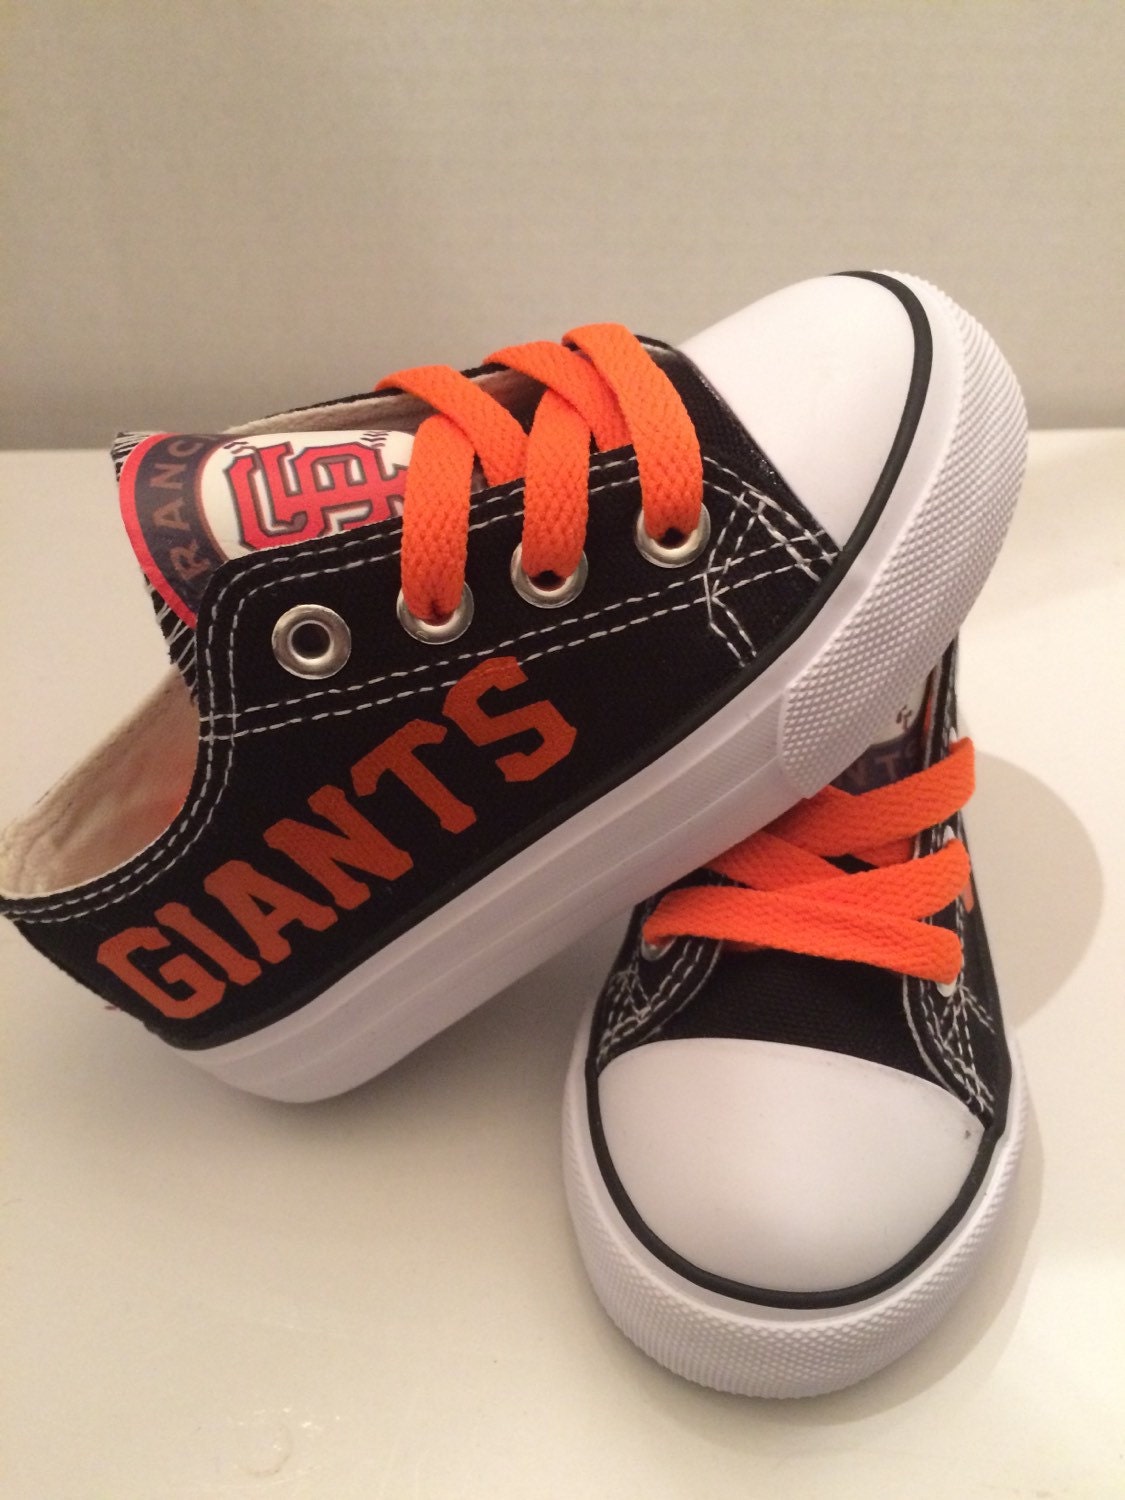 San francisco giants toddlers shoes by sportzshoeking on Etsy